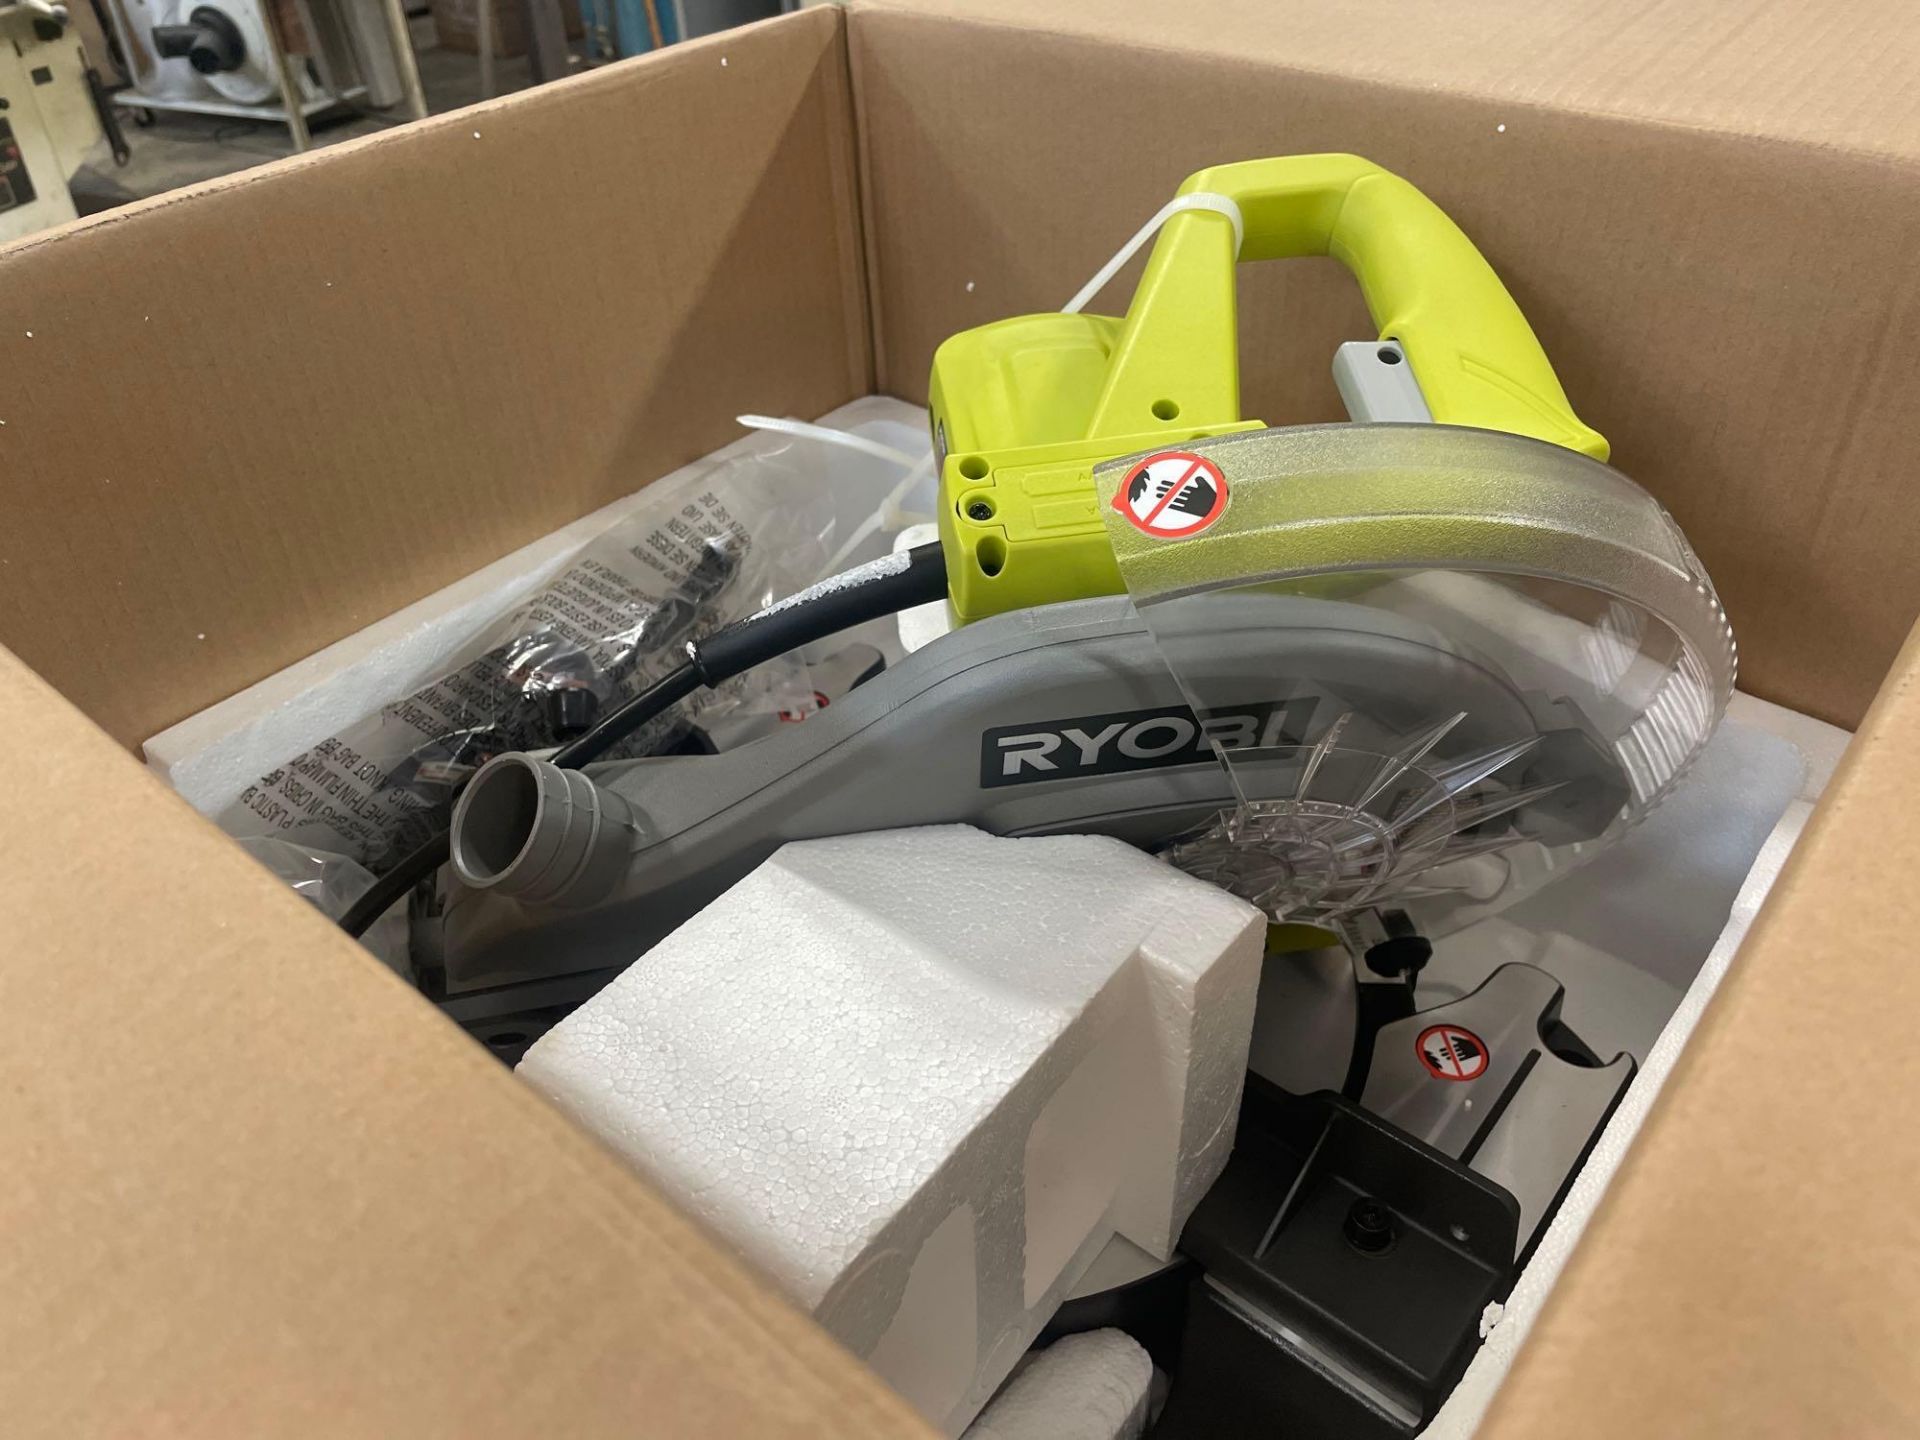 New Ryobi 10" Compound Miter Saw with Laser - Image 4 of 6